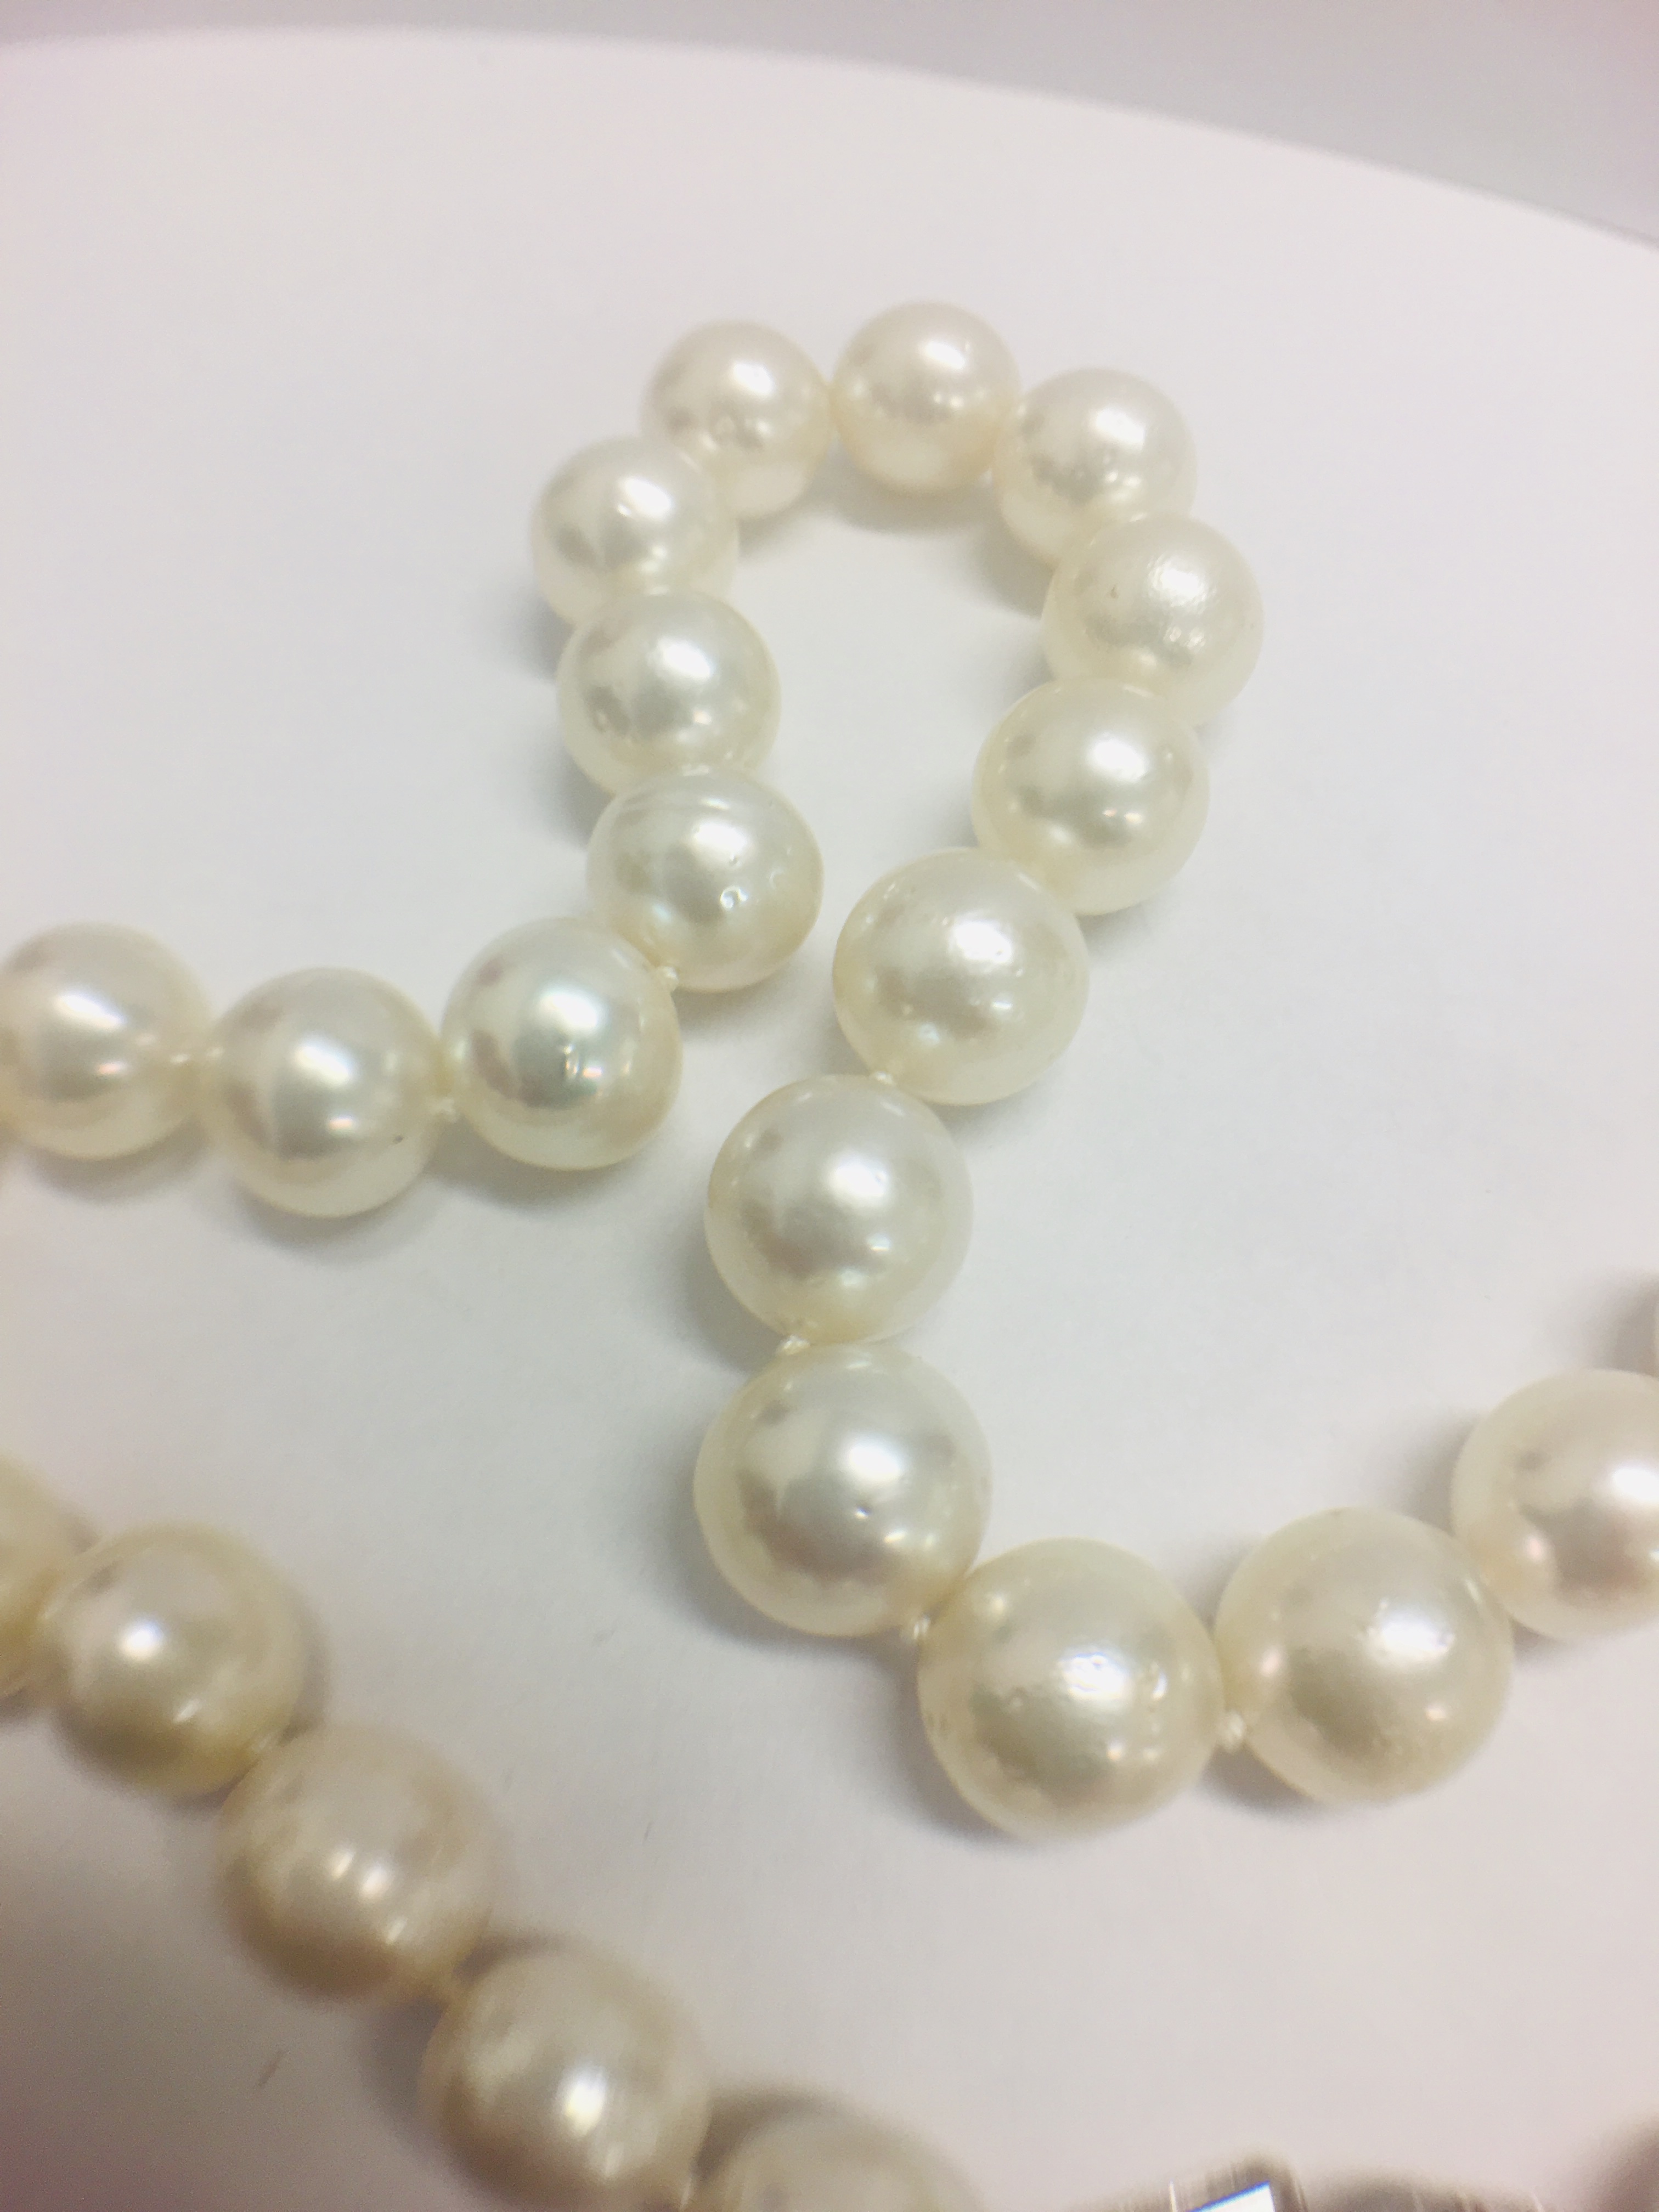 Strand 35 South Sea Pearls With 14Ct White Gold Filagree Style Ball Clasp. - Image 7 of 10